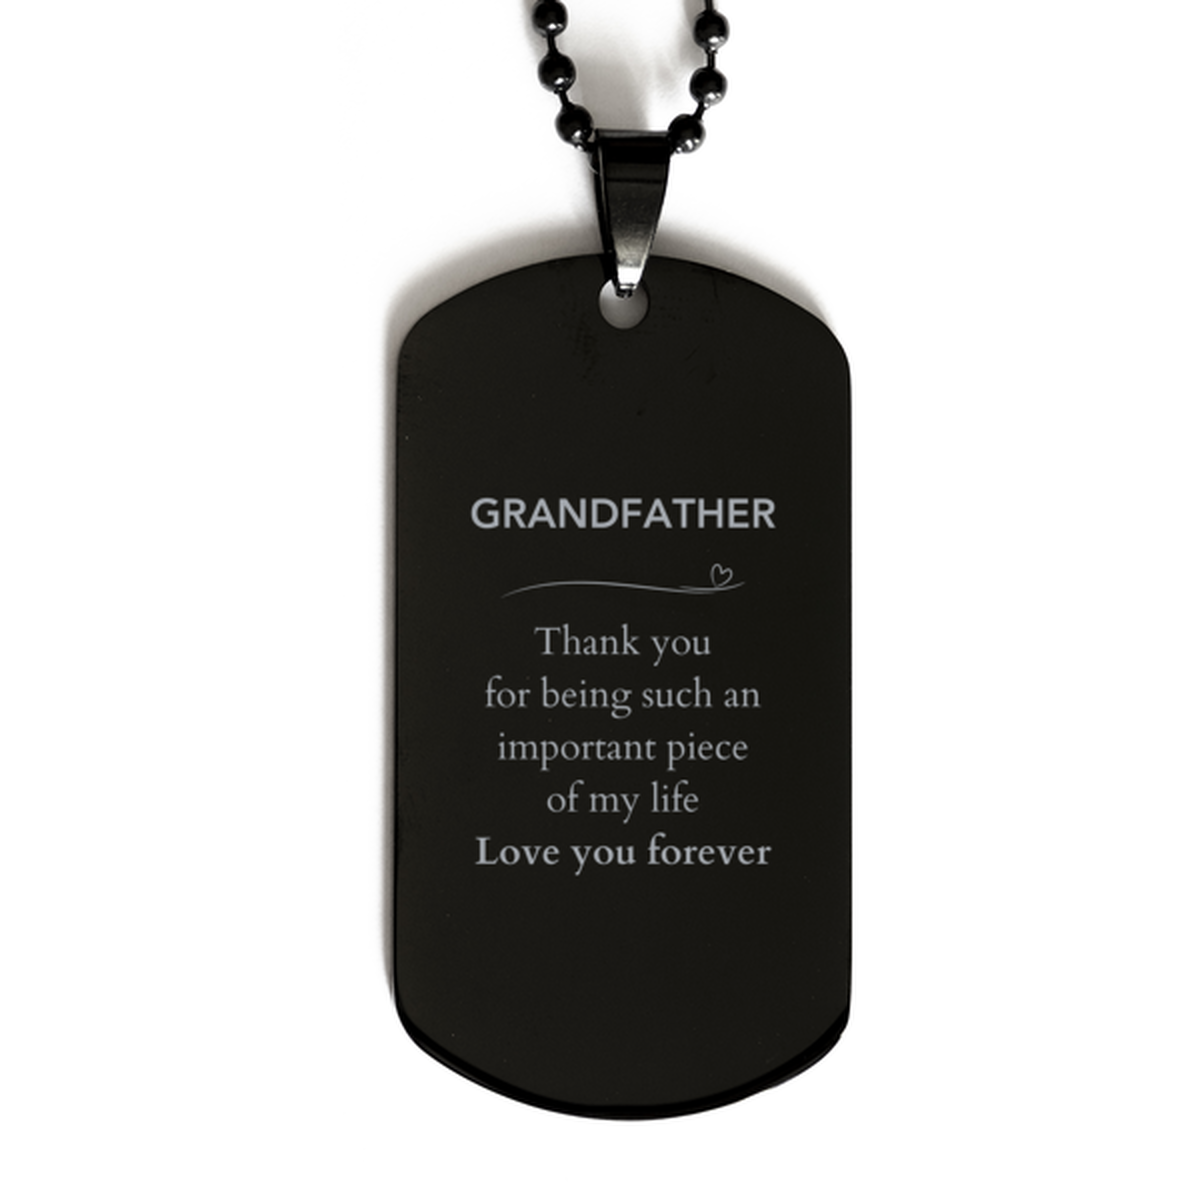 Appropriate Grandfather Black Dog Tag Epic Birthday Gifts for Grandfather Thank you for being such an important piece of my life Grandfather Christmas Mothers Fathers Day